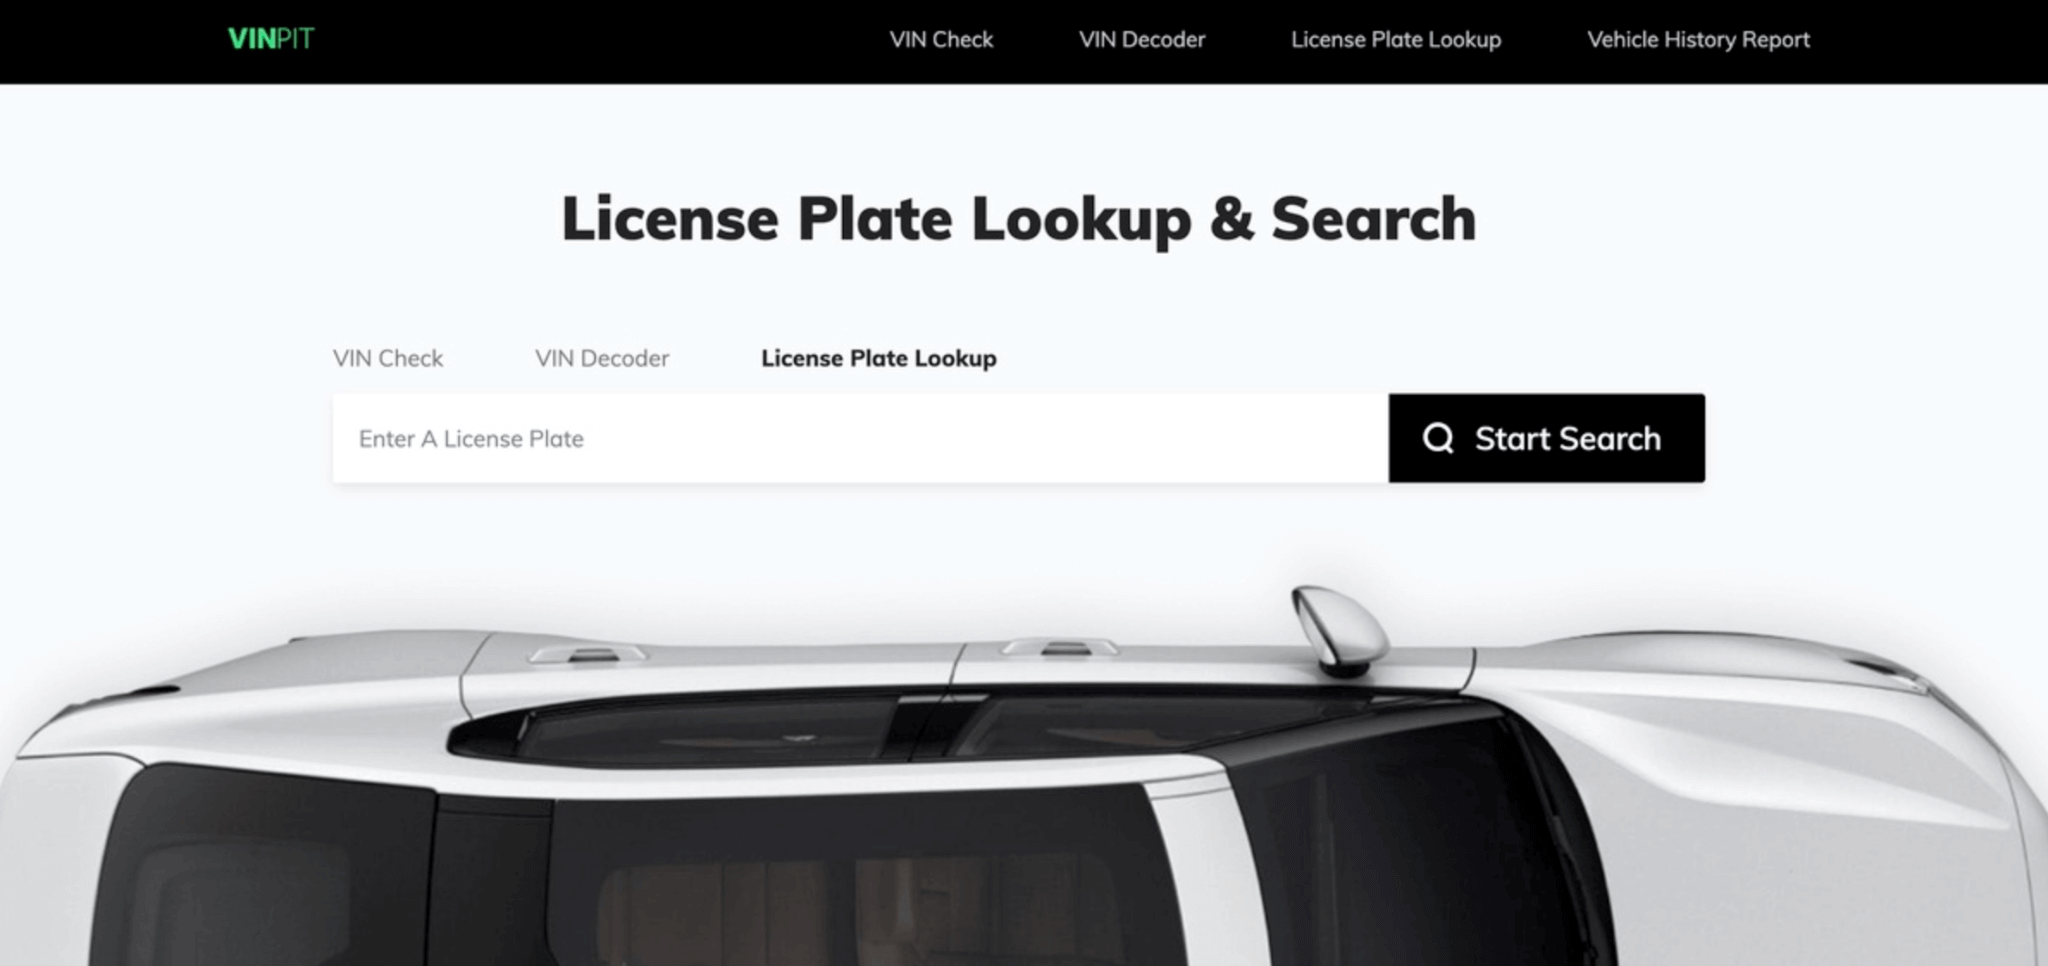 How to Run a License Plate Lookup